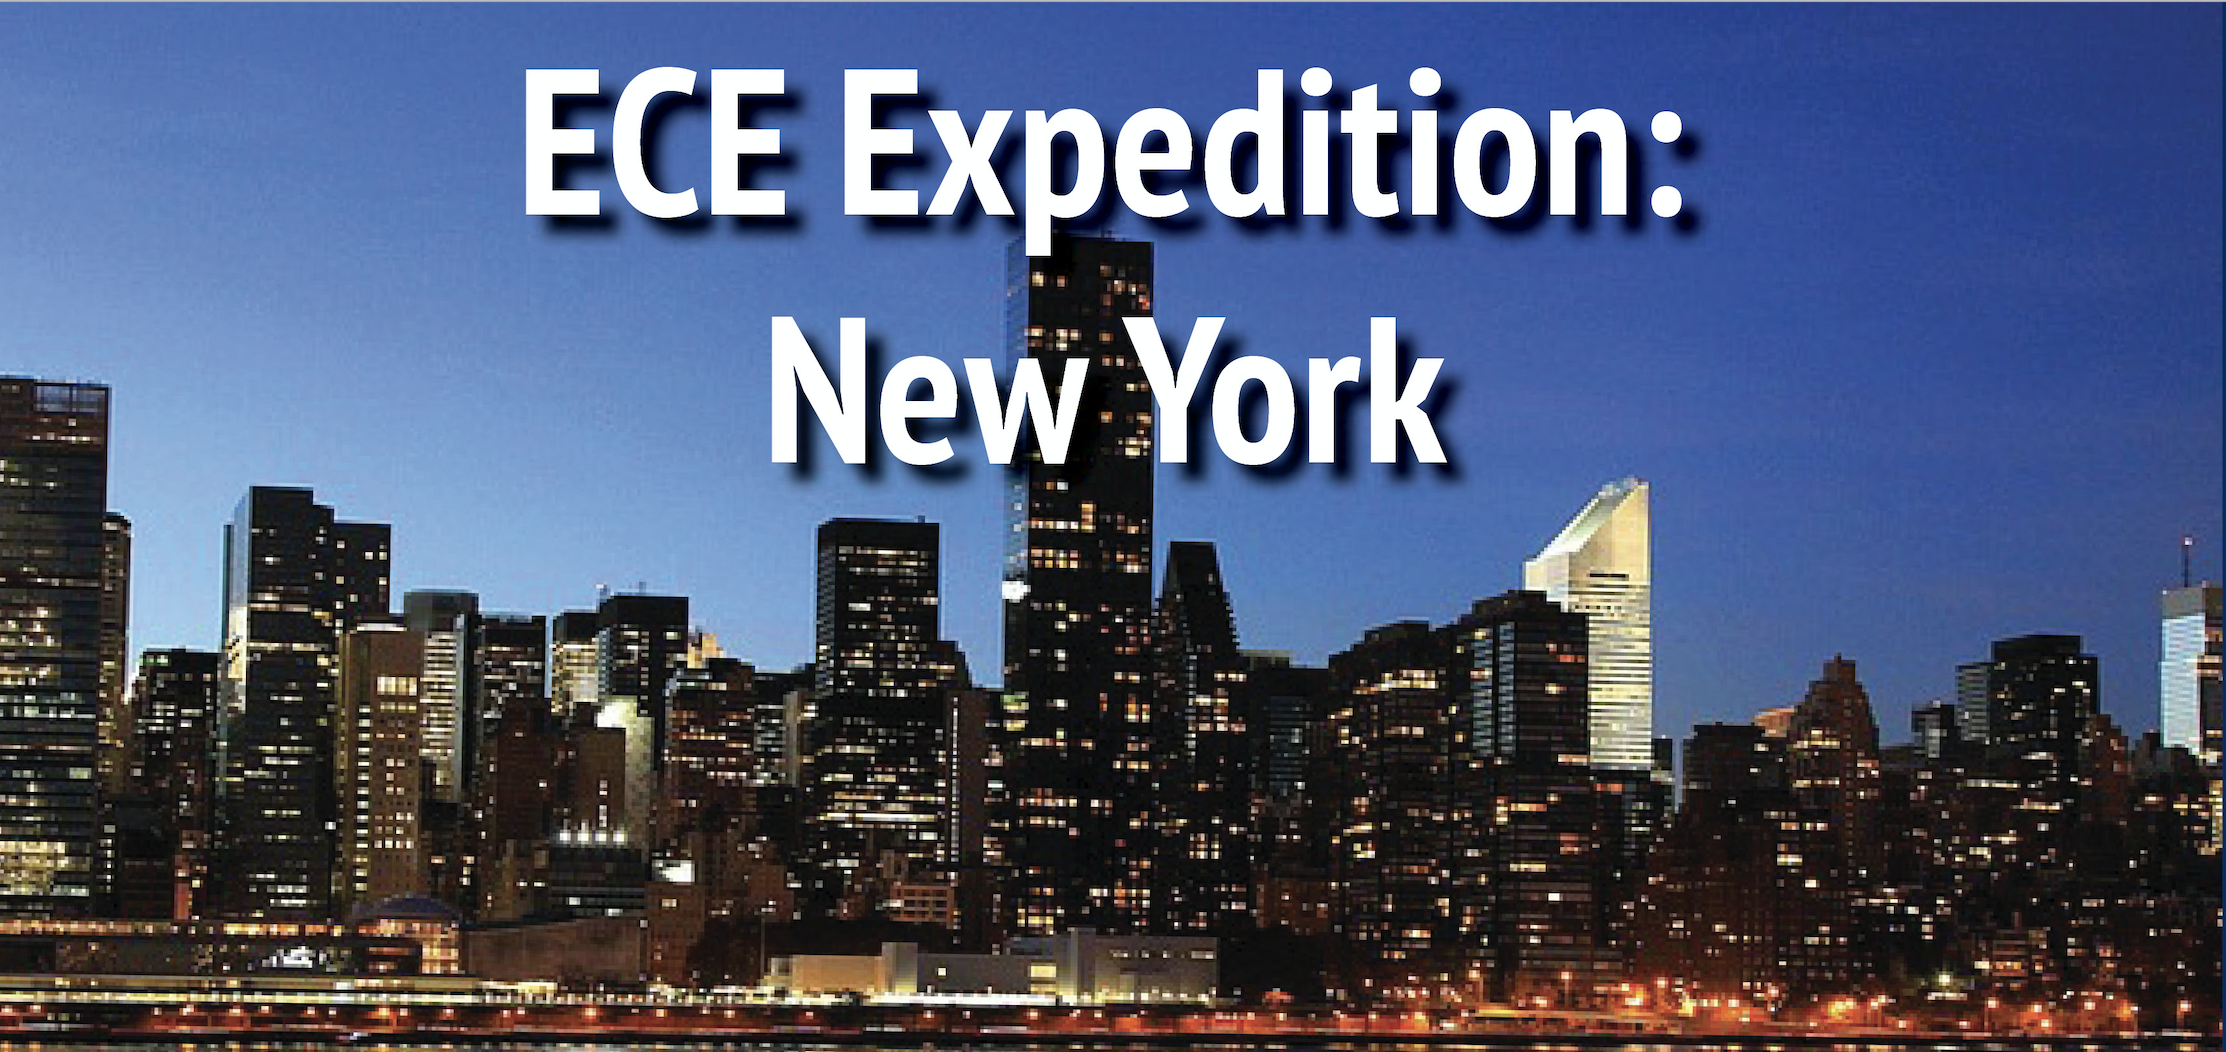 Expedition New York